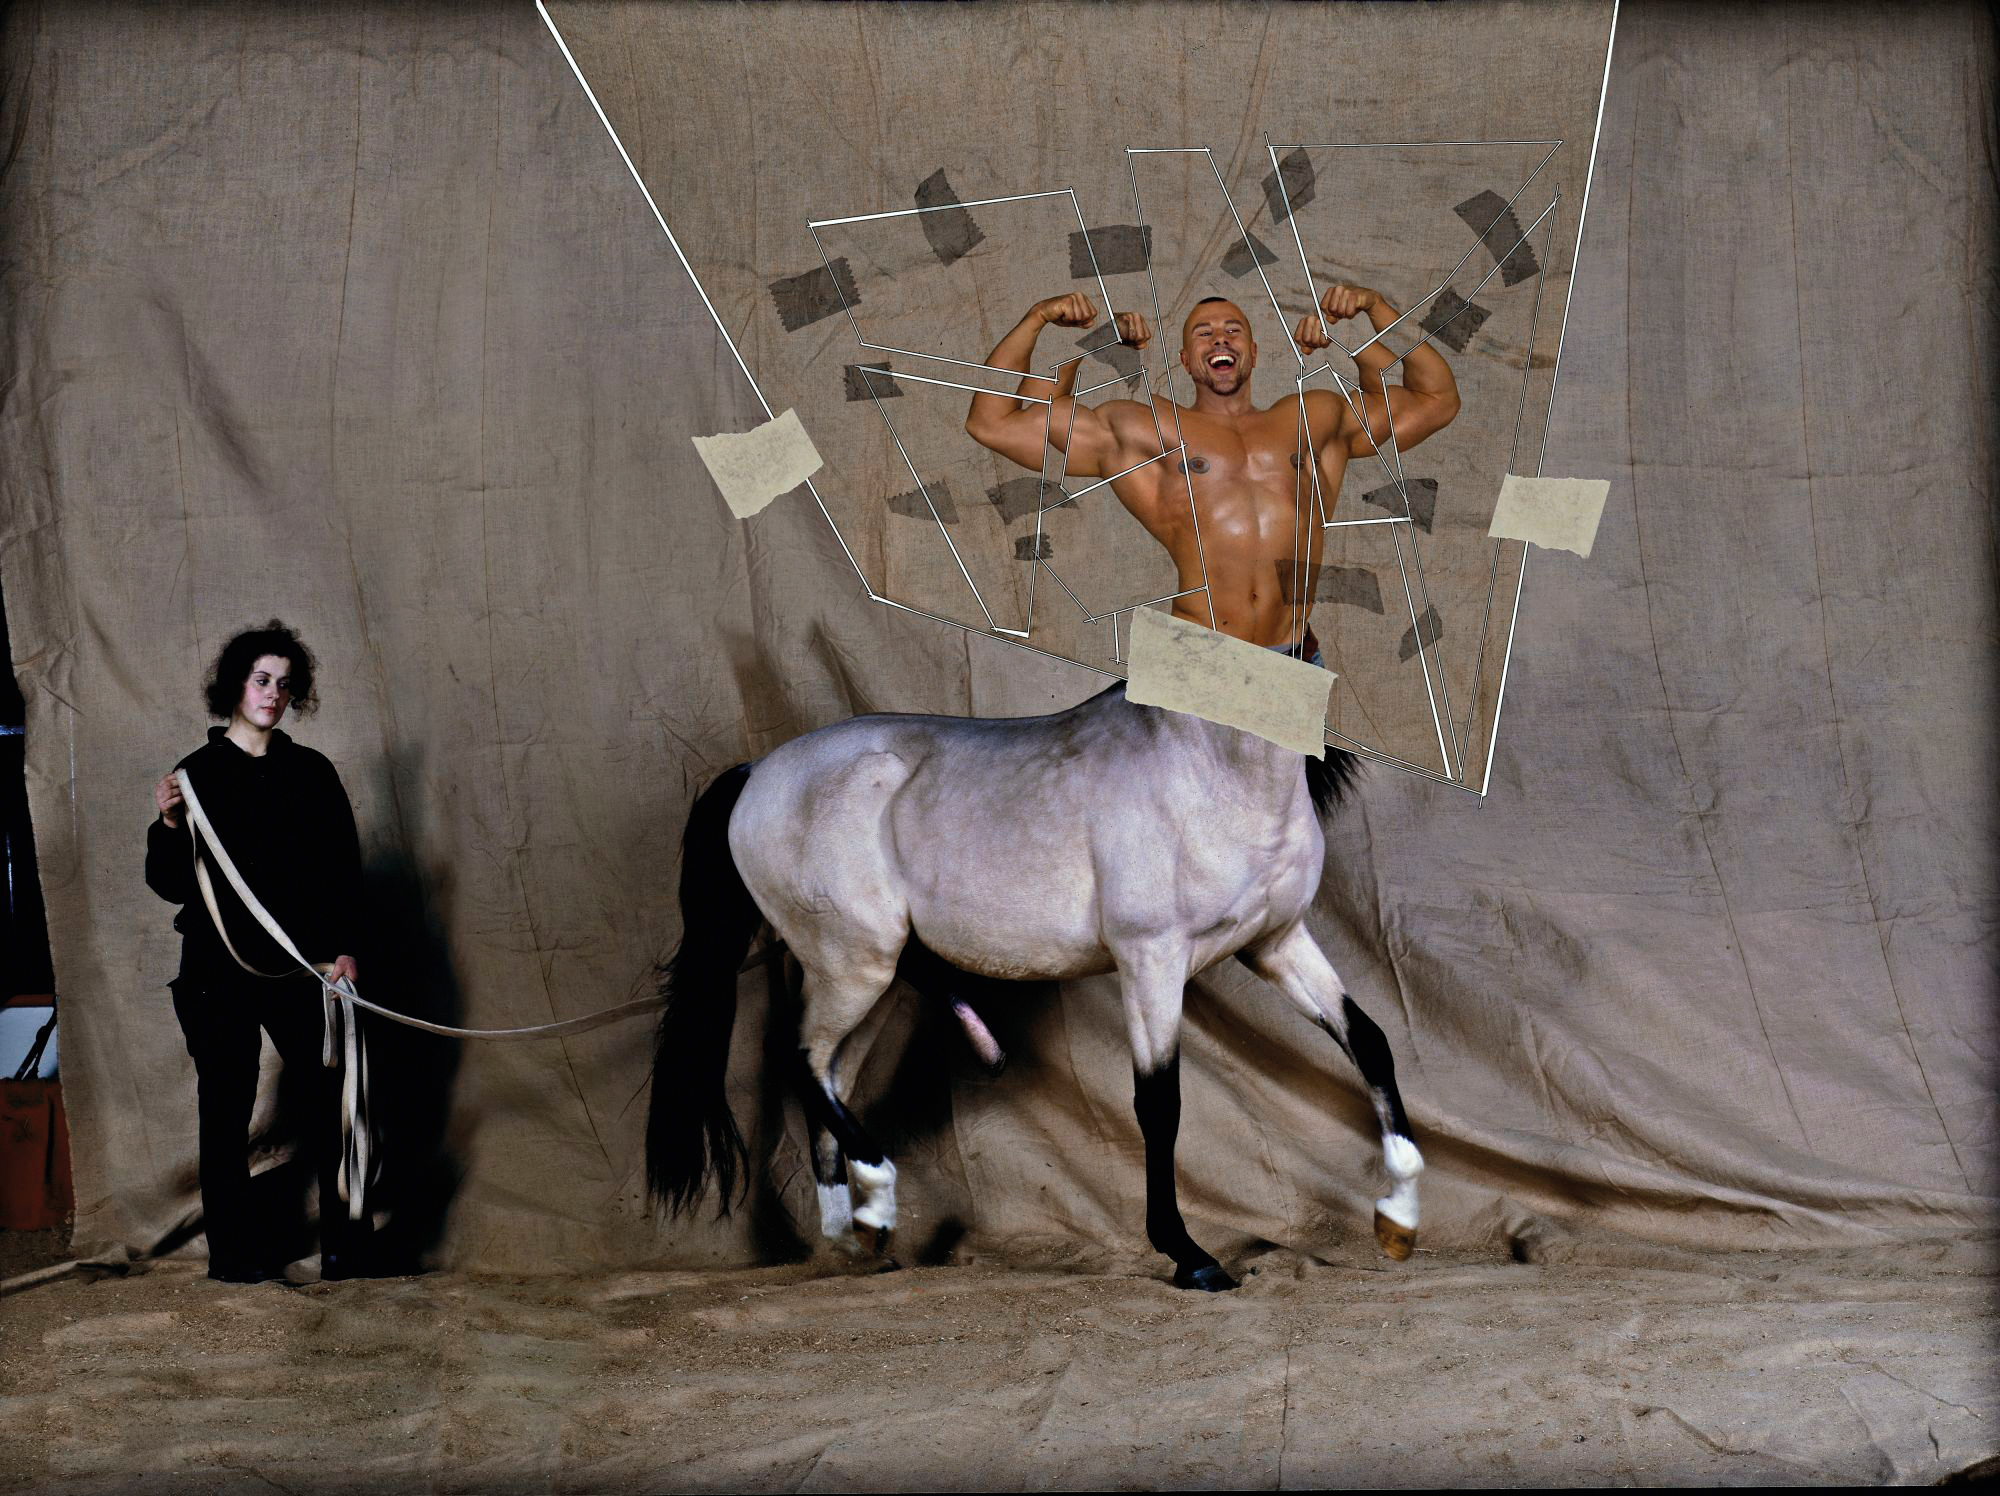  Thierry Mugler by Jean-Paul Goude, image courtesy of The Brooklyn Museum